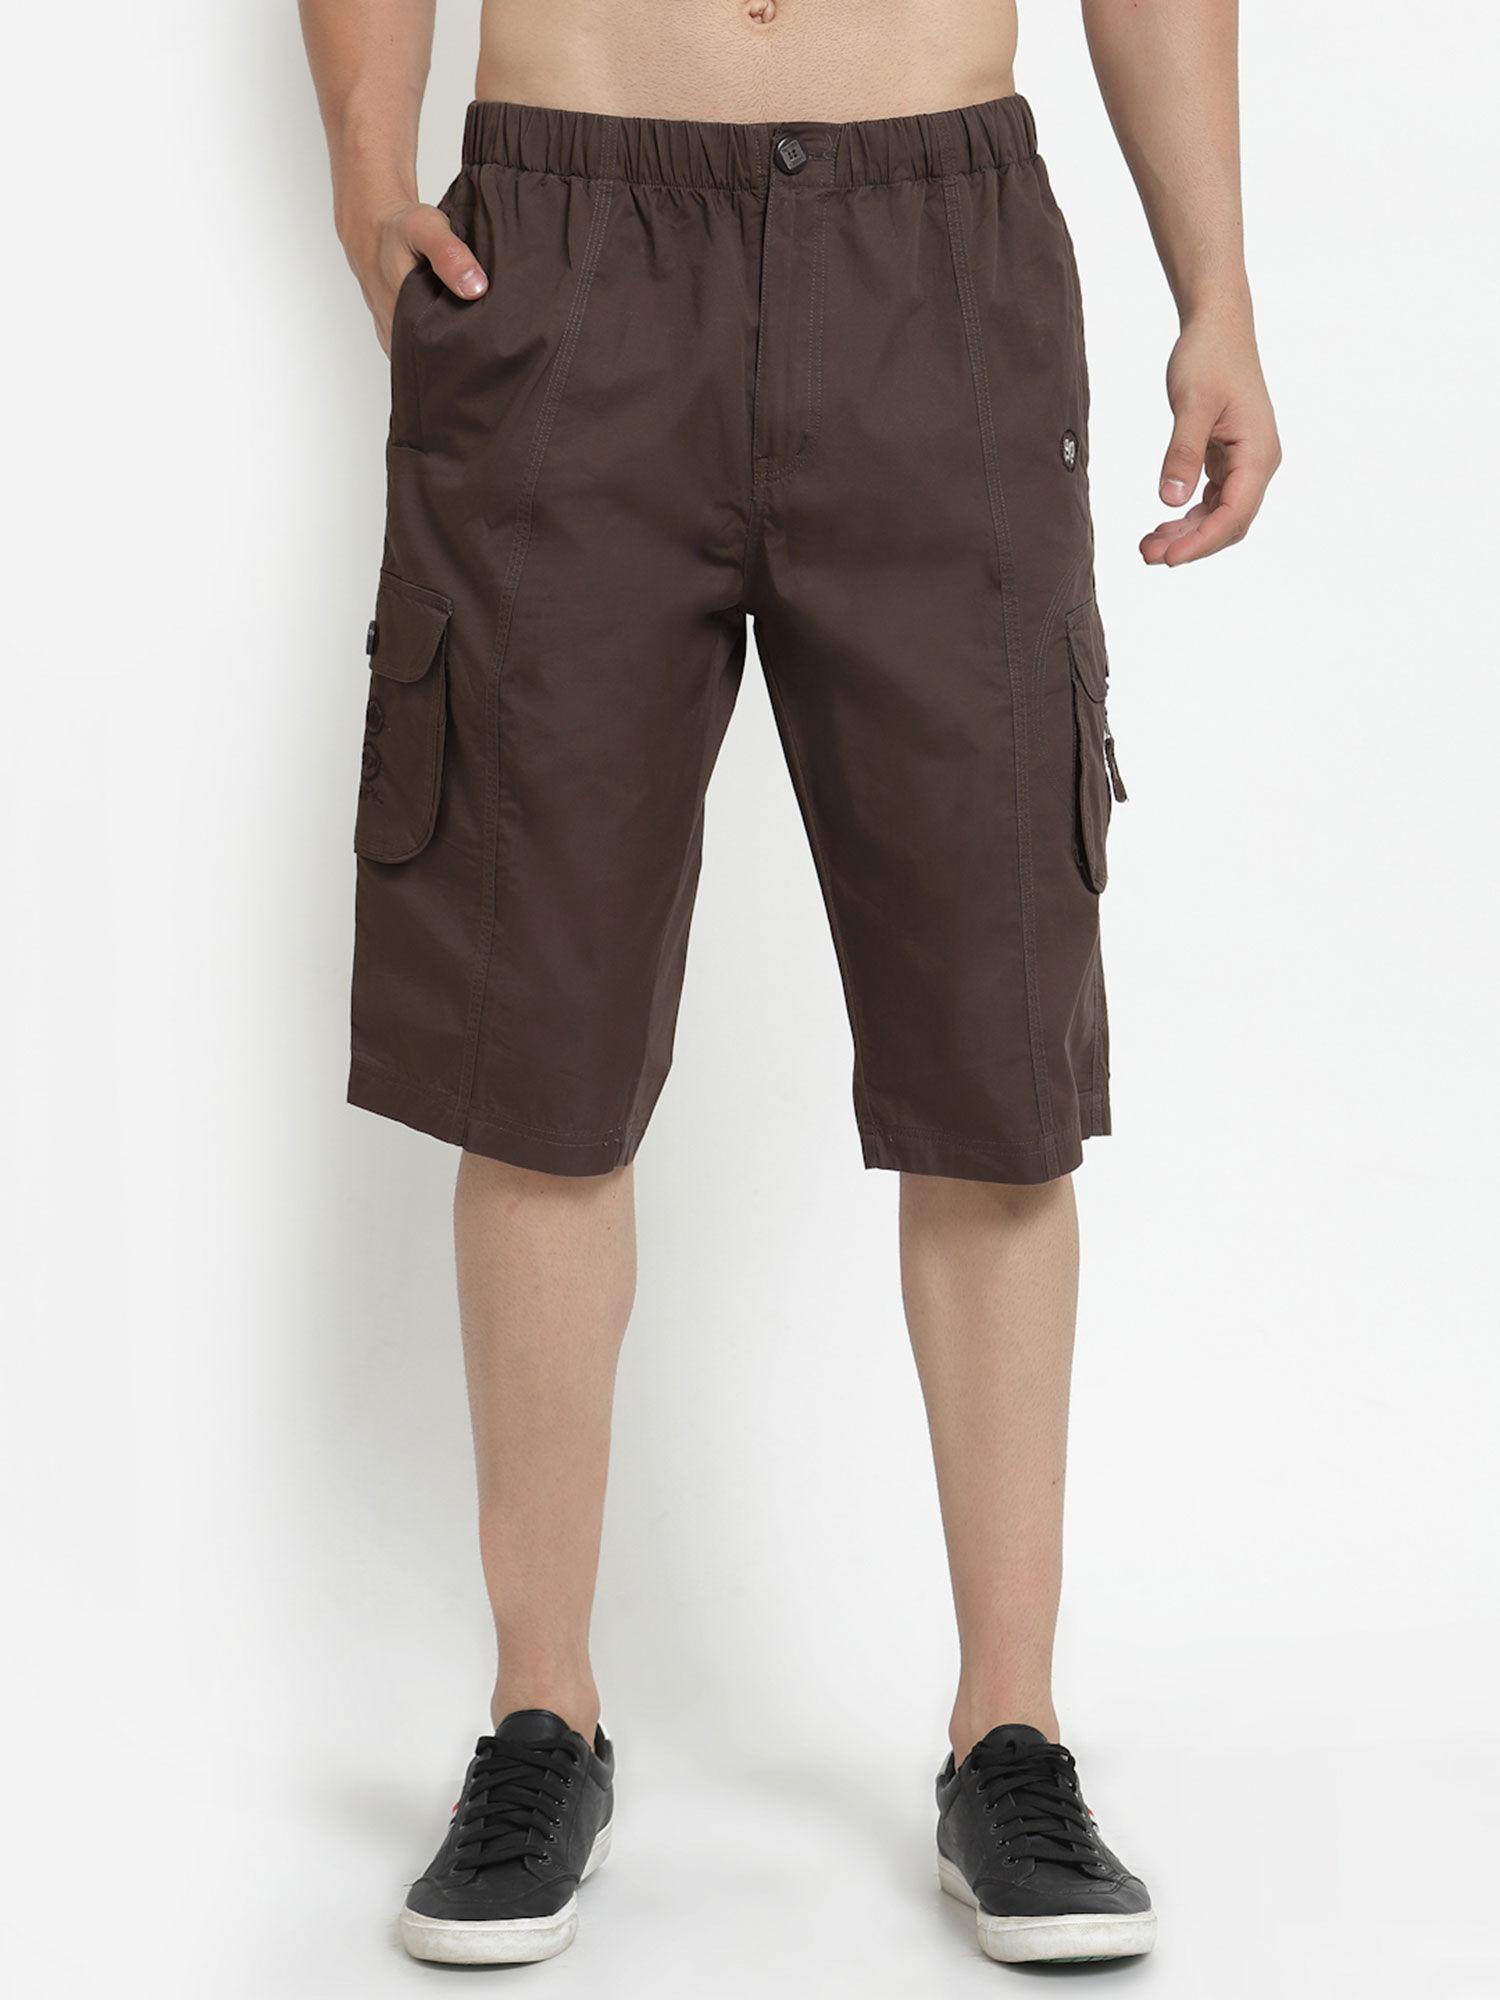 brown cotton casual wear 3/4 shorts